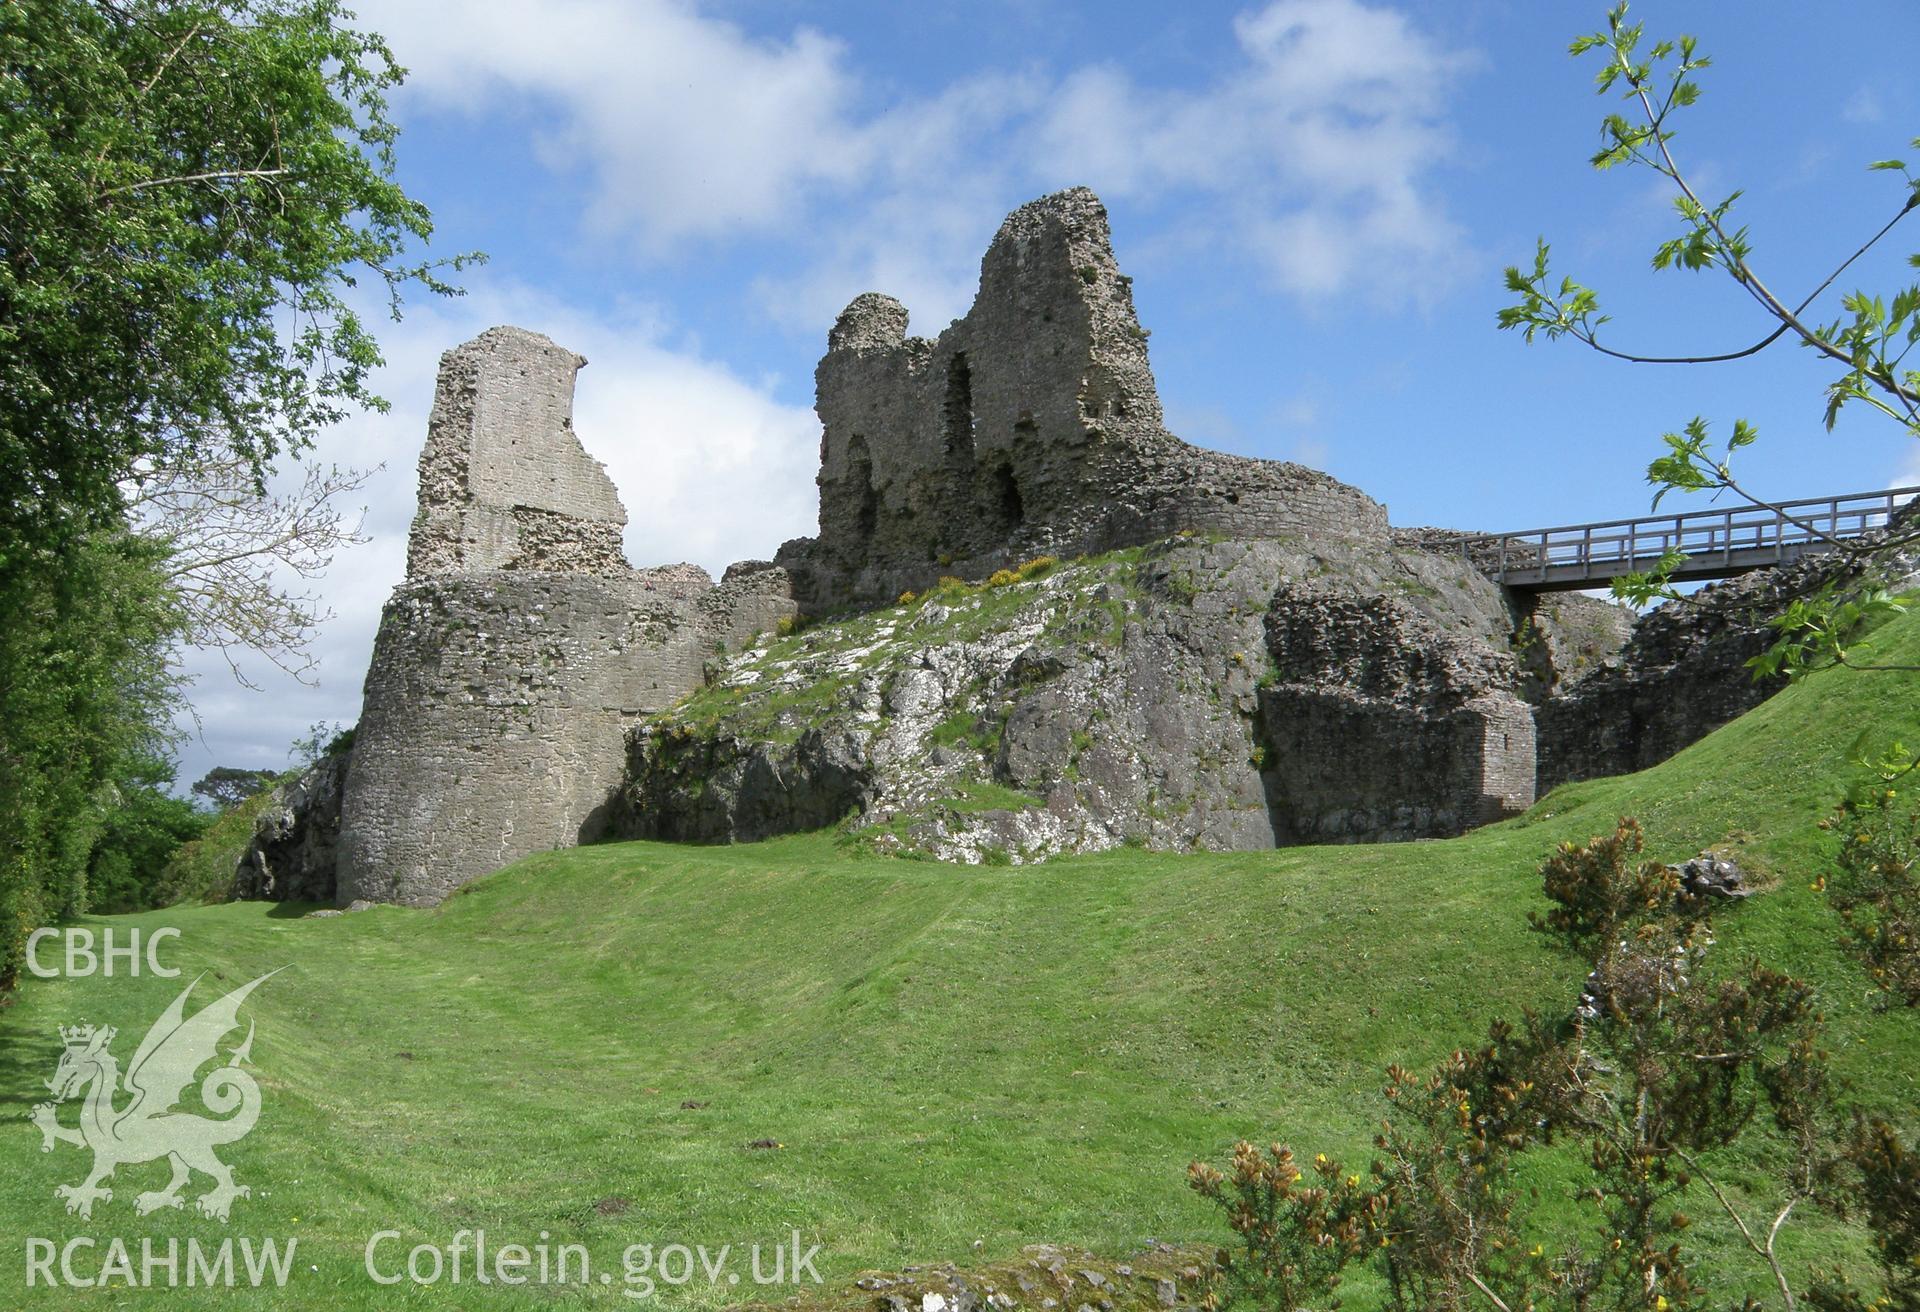 Colour photo showing Montgomery Castle, produced by Paul R. Davis,  10th May 2014.